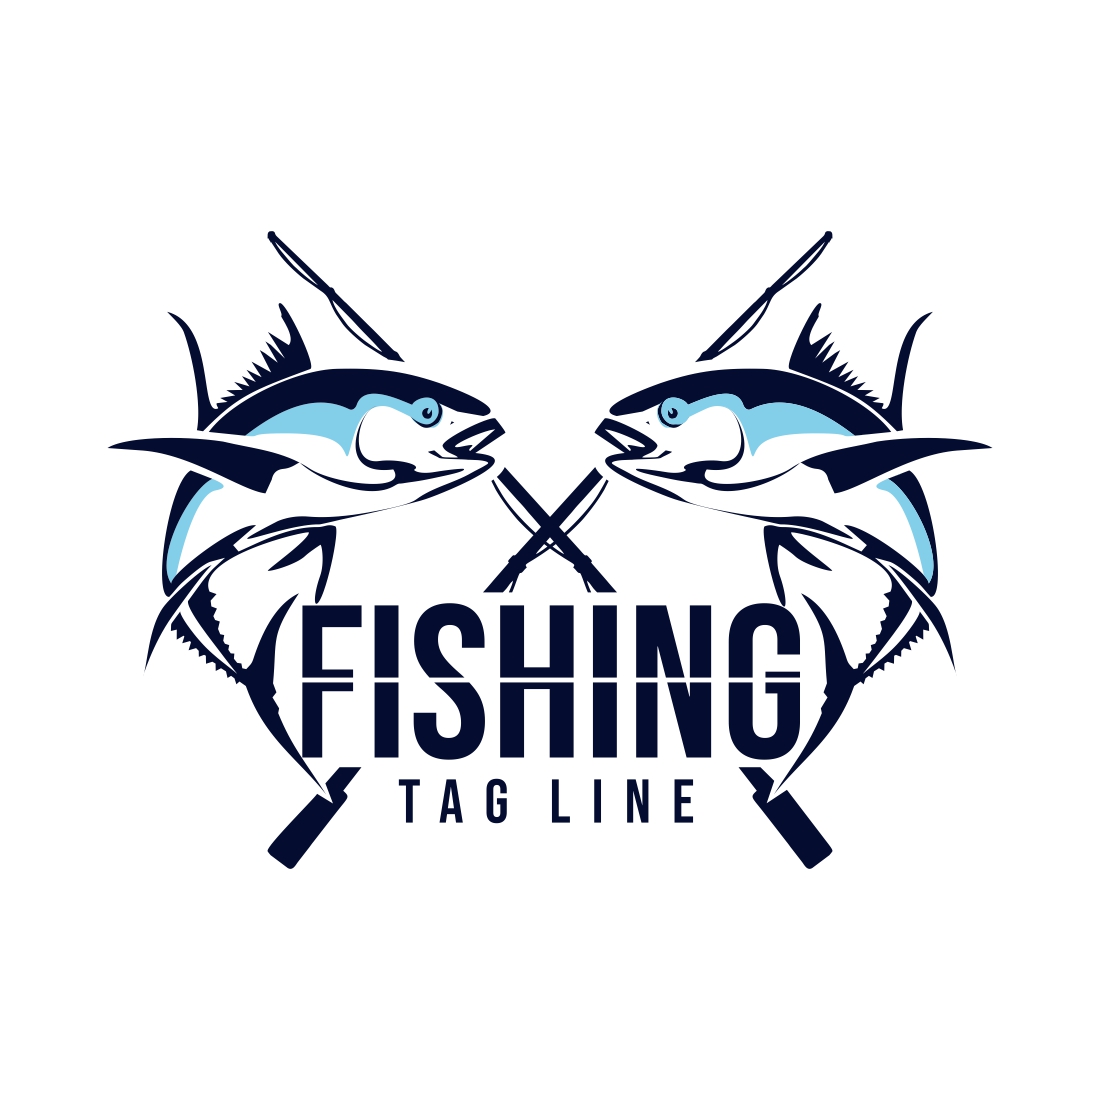 Fishing logo two Bass fish with two fishing rod symbols Fishing theme vector illustration cover image.